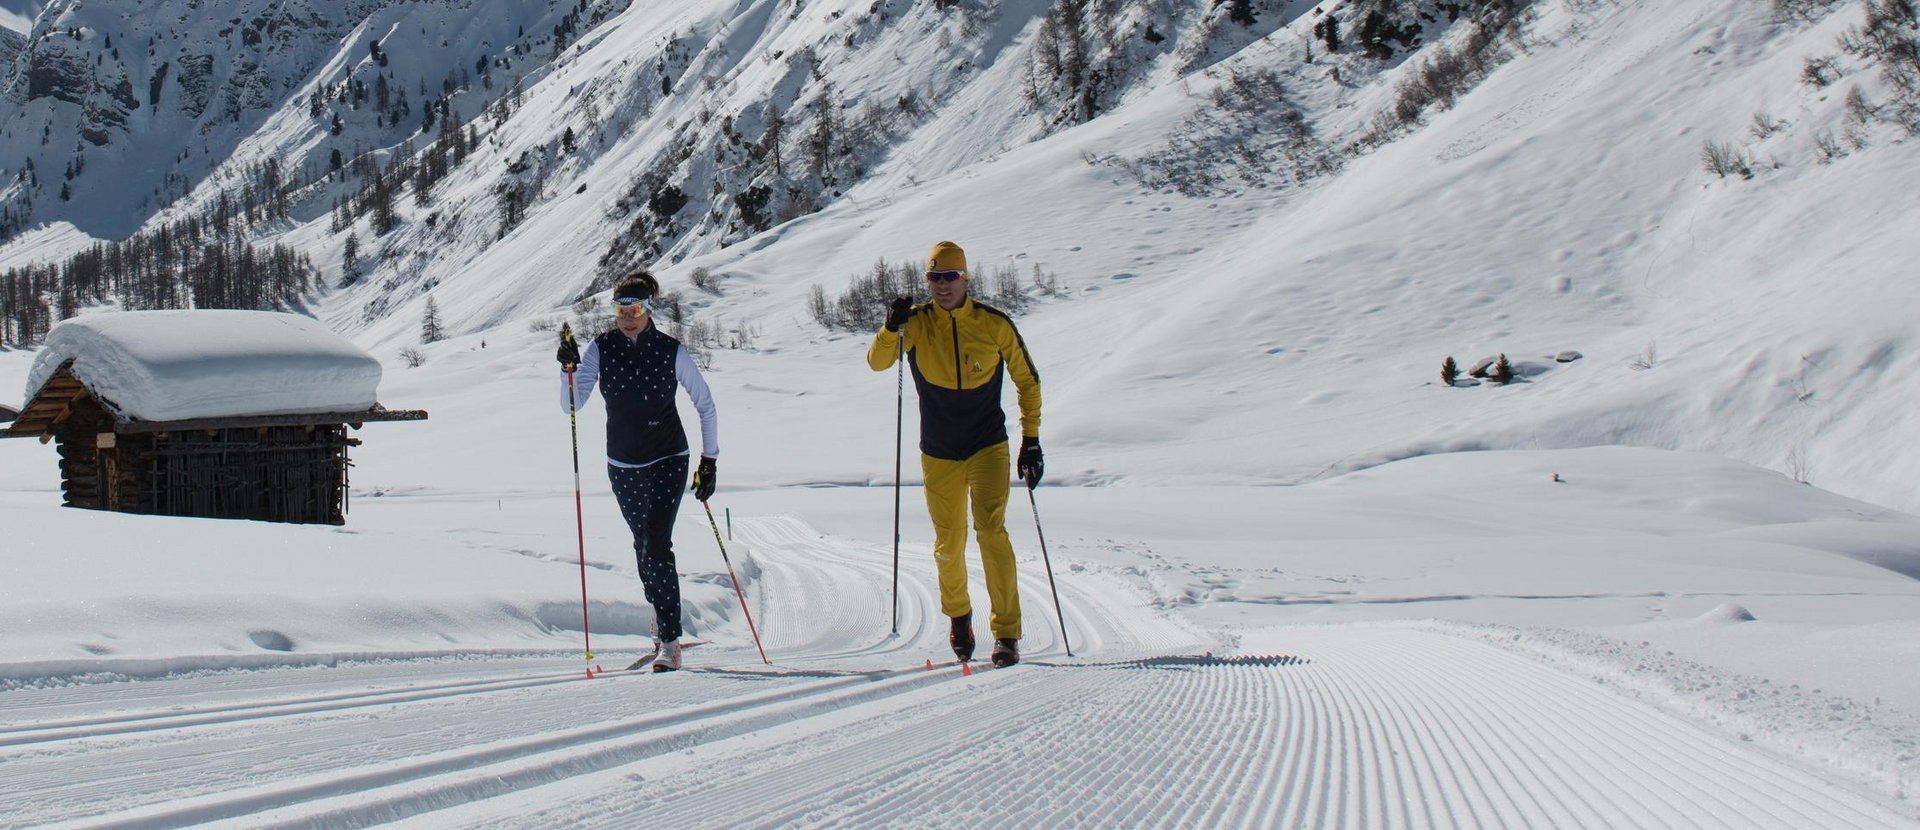 Cross-country skiing in Davos Klosters